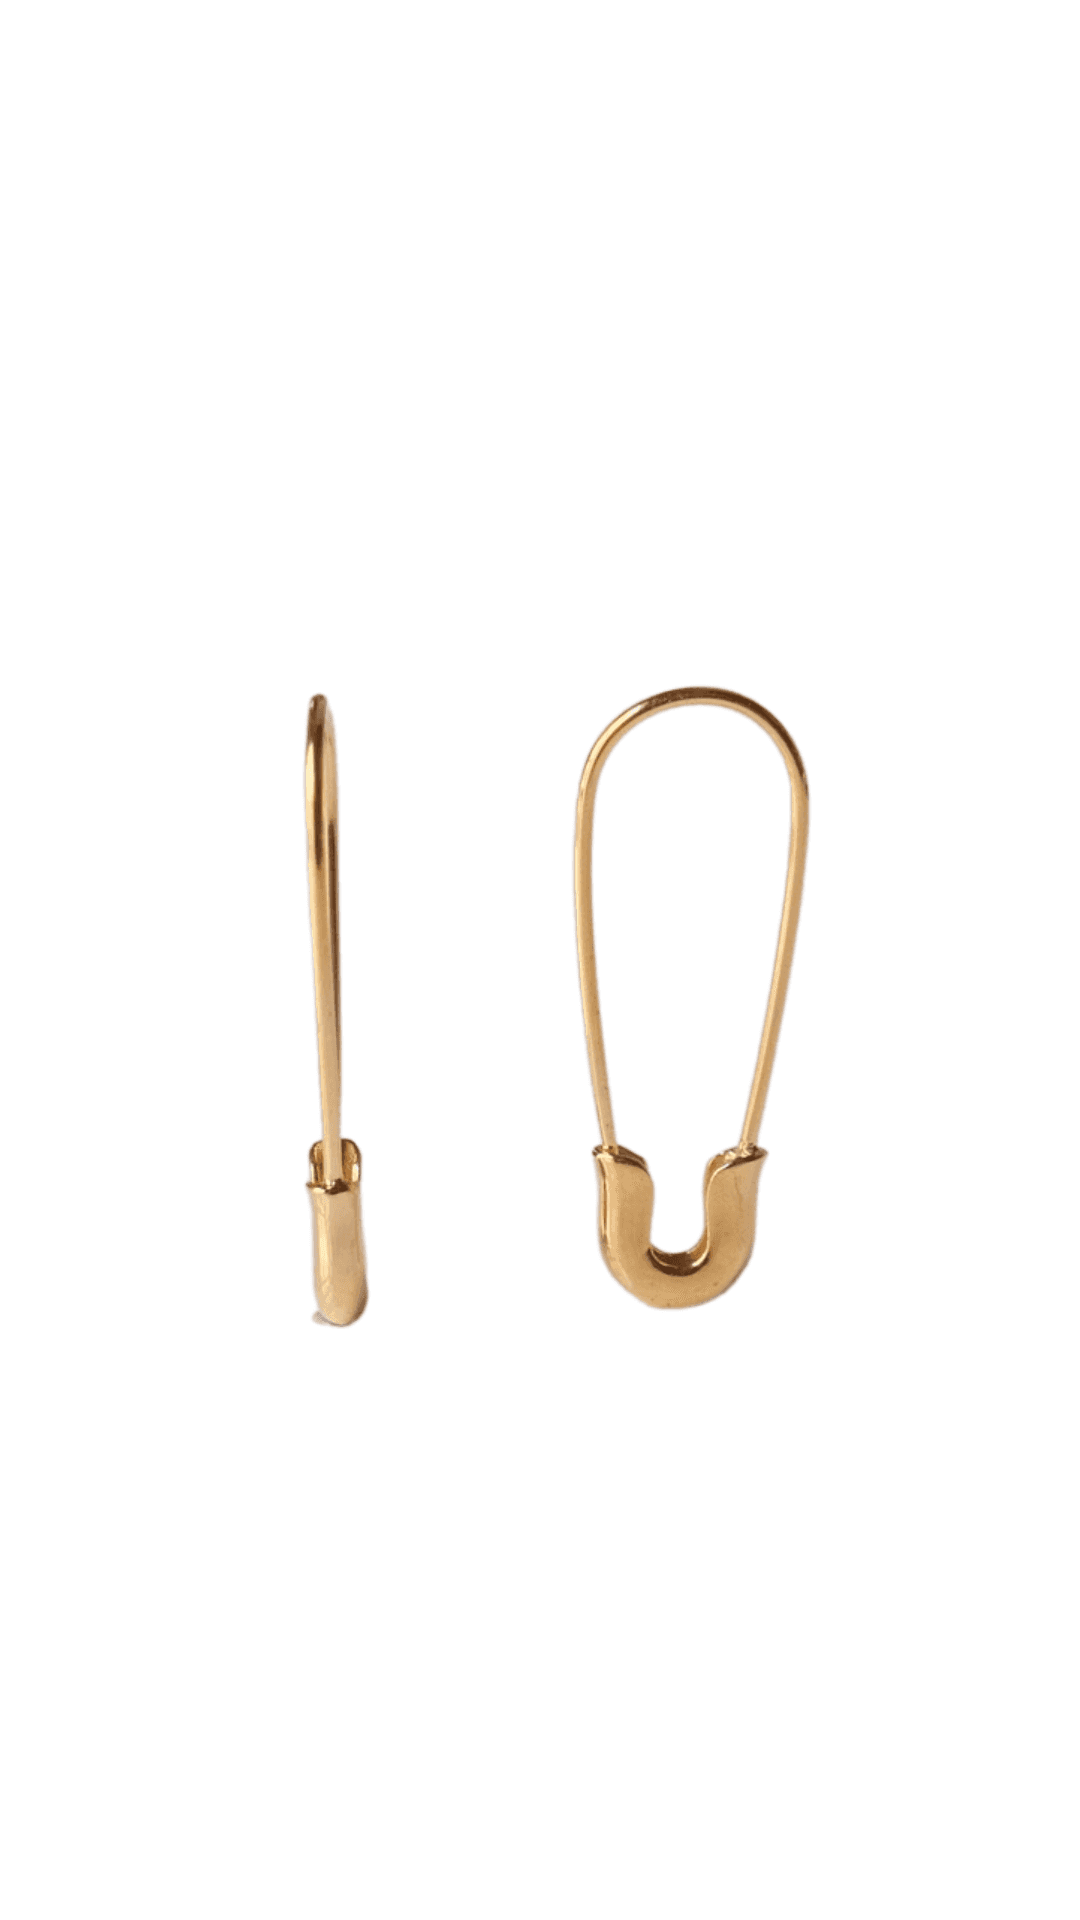 Buy Modern Safety Pin Earrings Statement Earrings Gold Safety Pin Jewelry  Hoop Earrings Lightweight Earrings Minimalist Earrings Online in India -  Etsy